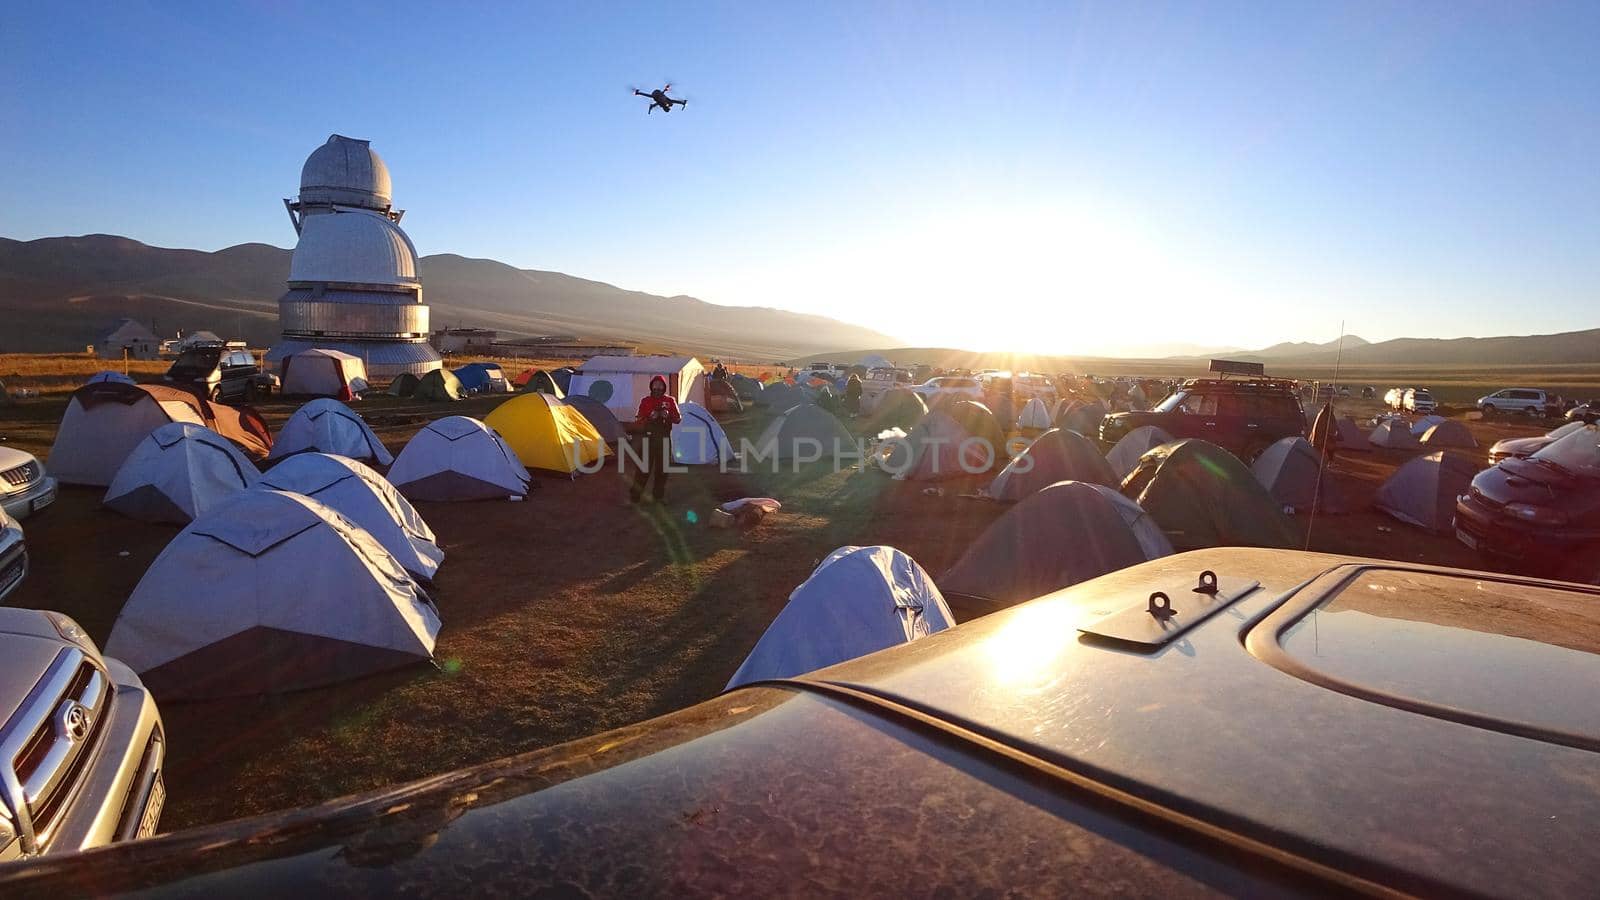 Sunrise over the camp near the Assi Observatory. The sun comes out from behind the high hills. Red-yellow color. Lots of tents and cars. The guy launches the drone. Telescopes are covered with domes